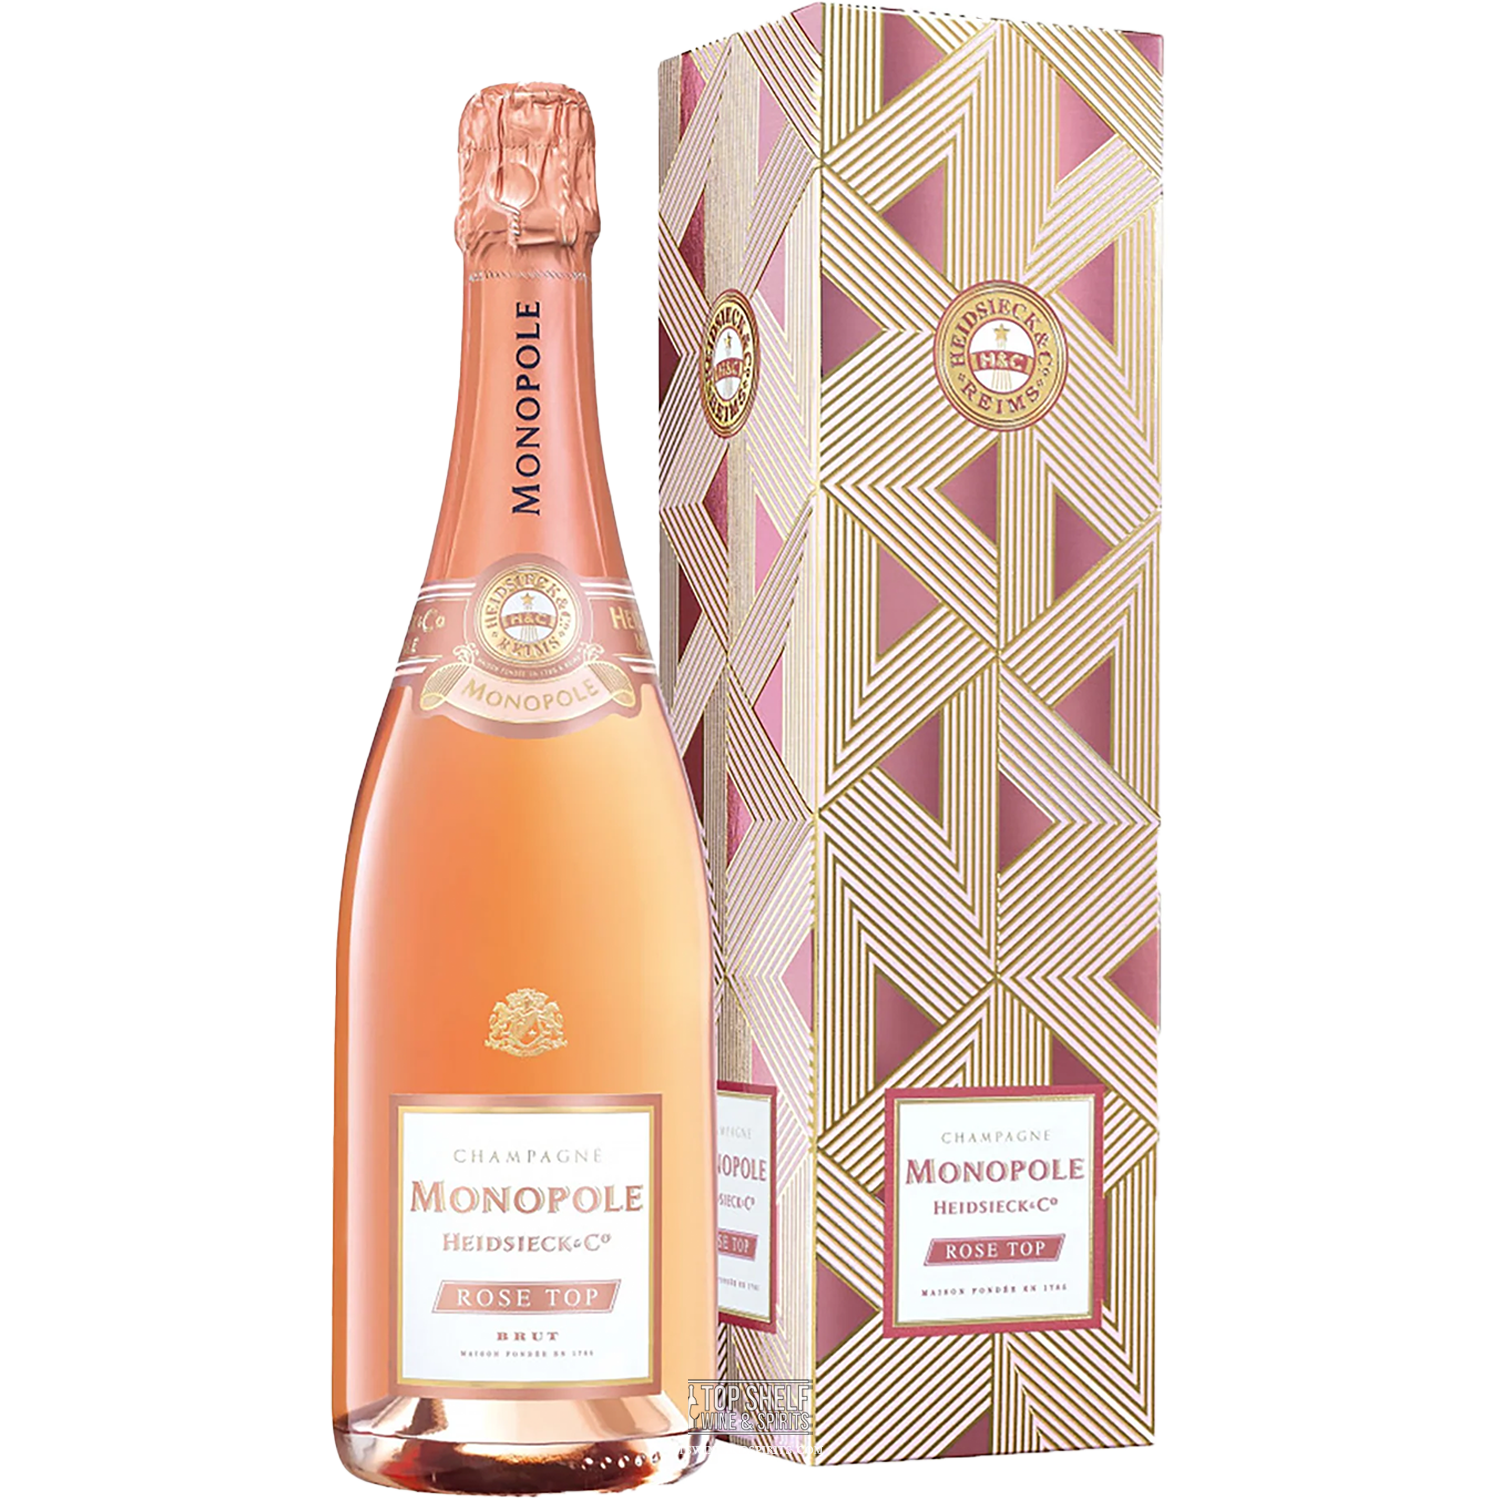 Monopole Champagne Heidsieck | Delivery Brut & Rosé Gifting